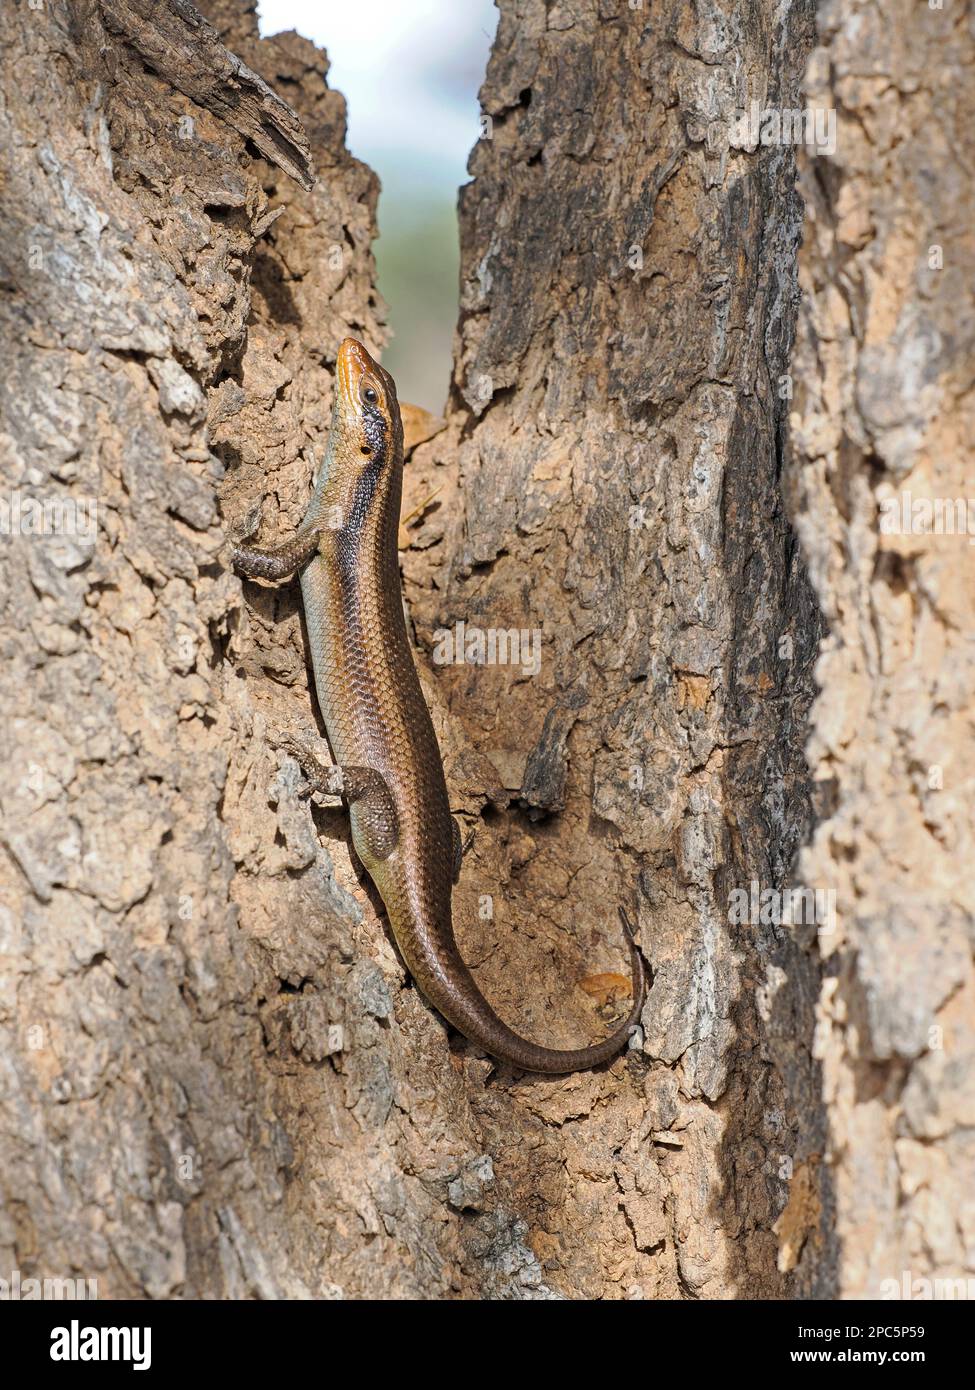 Wahlberg’s Skink (Trachylepis wahlbergii) adult resting in crevice in tree, Namibia, January Stock Photo